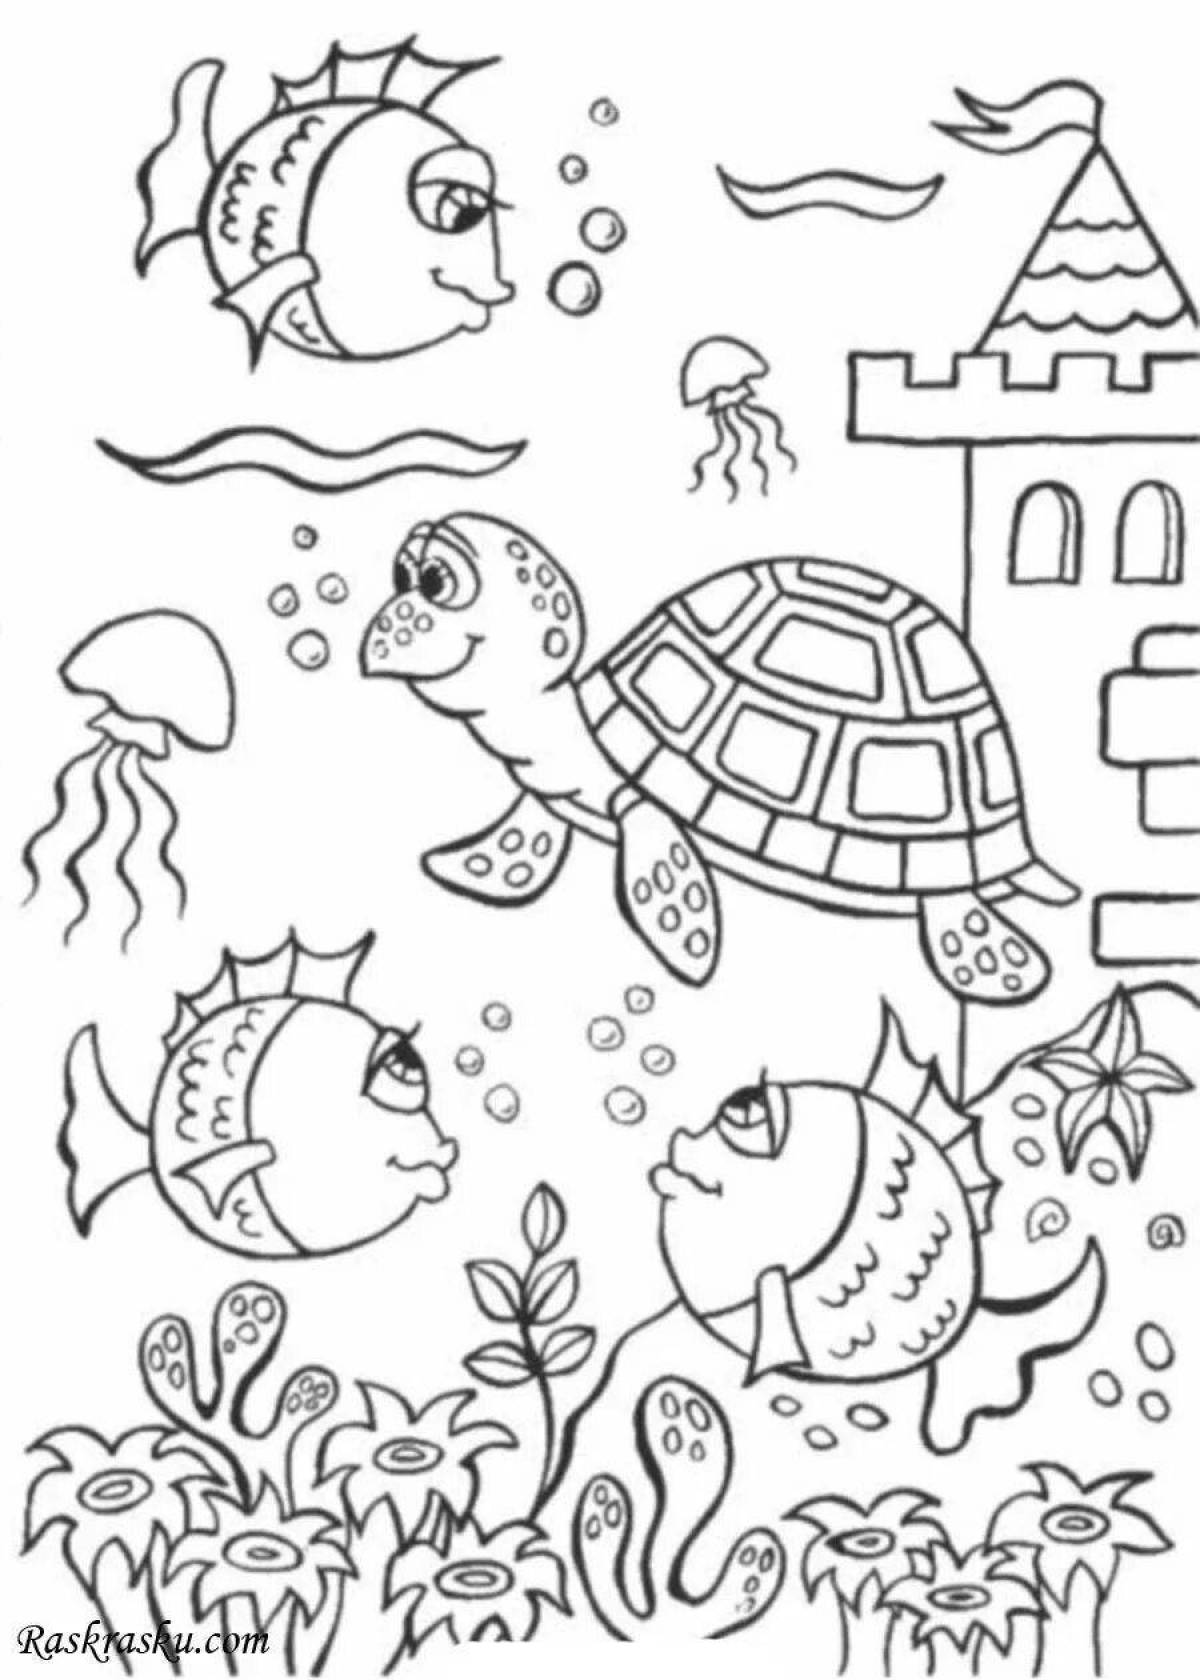 High water worlds coloring book